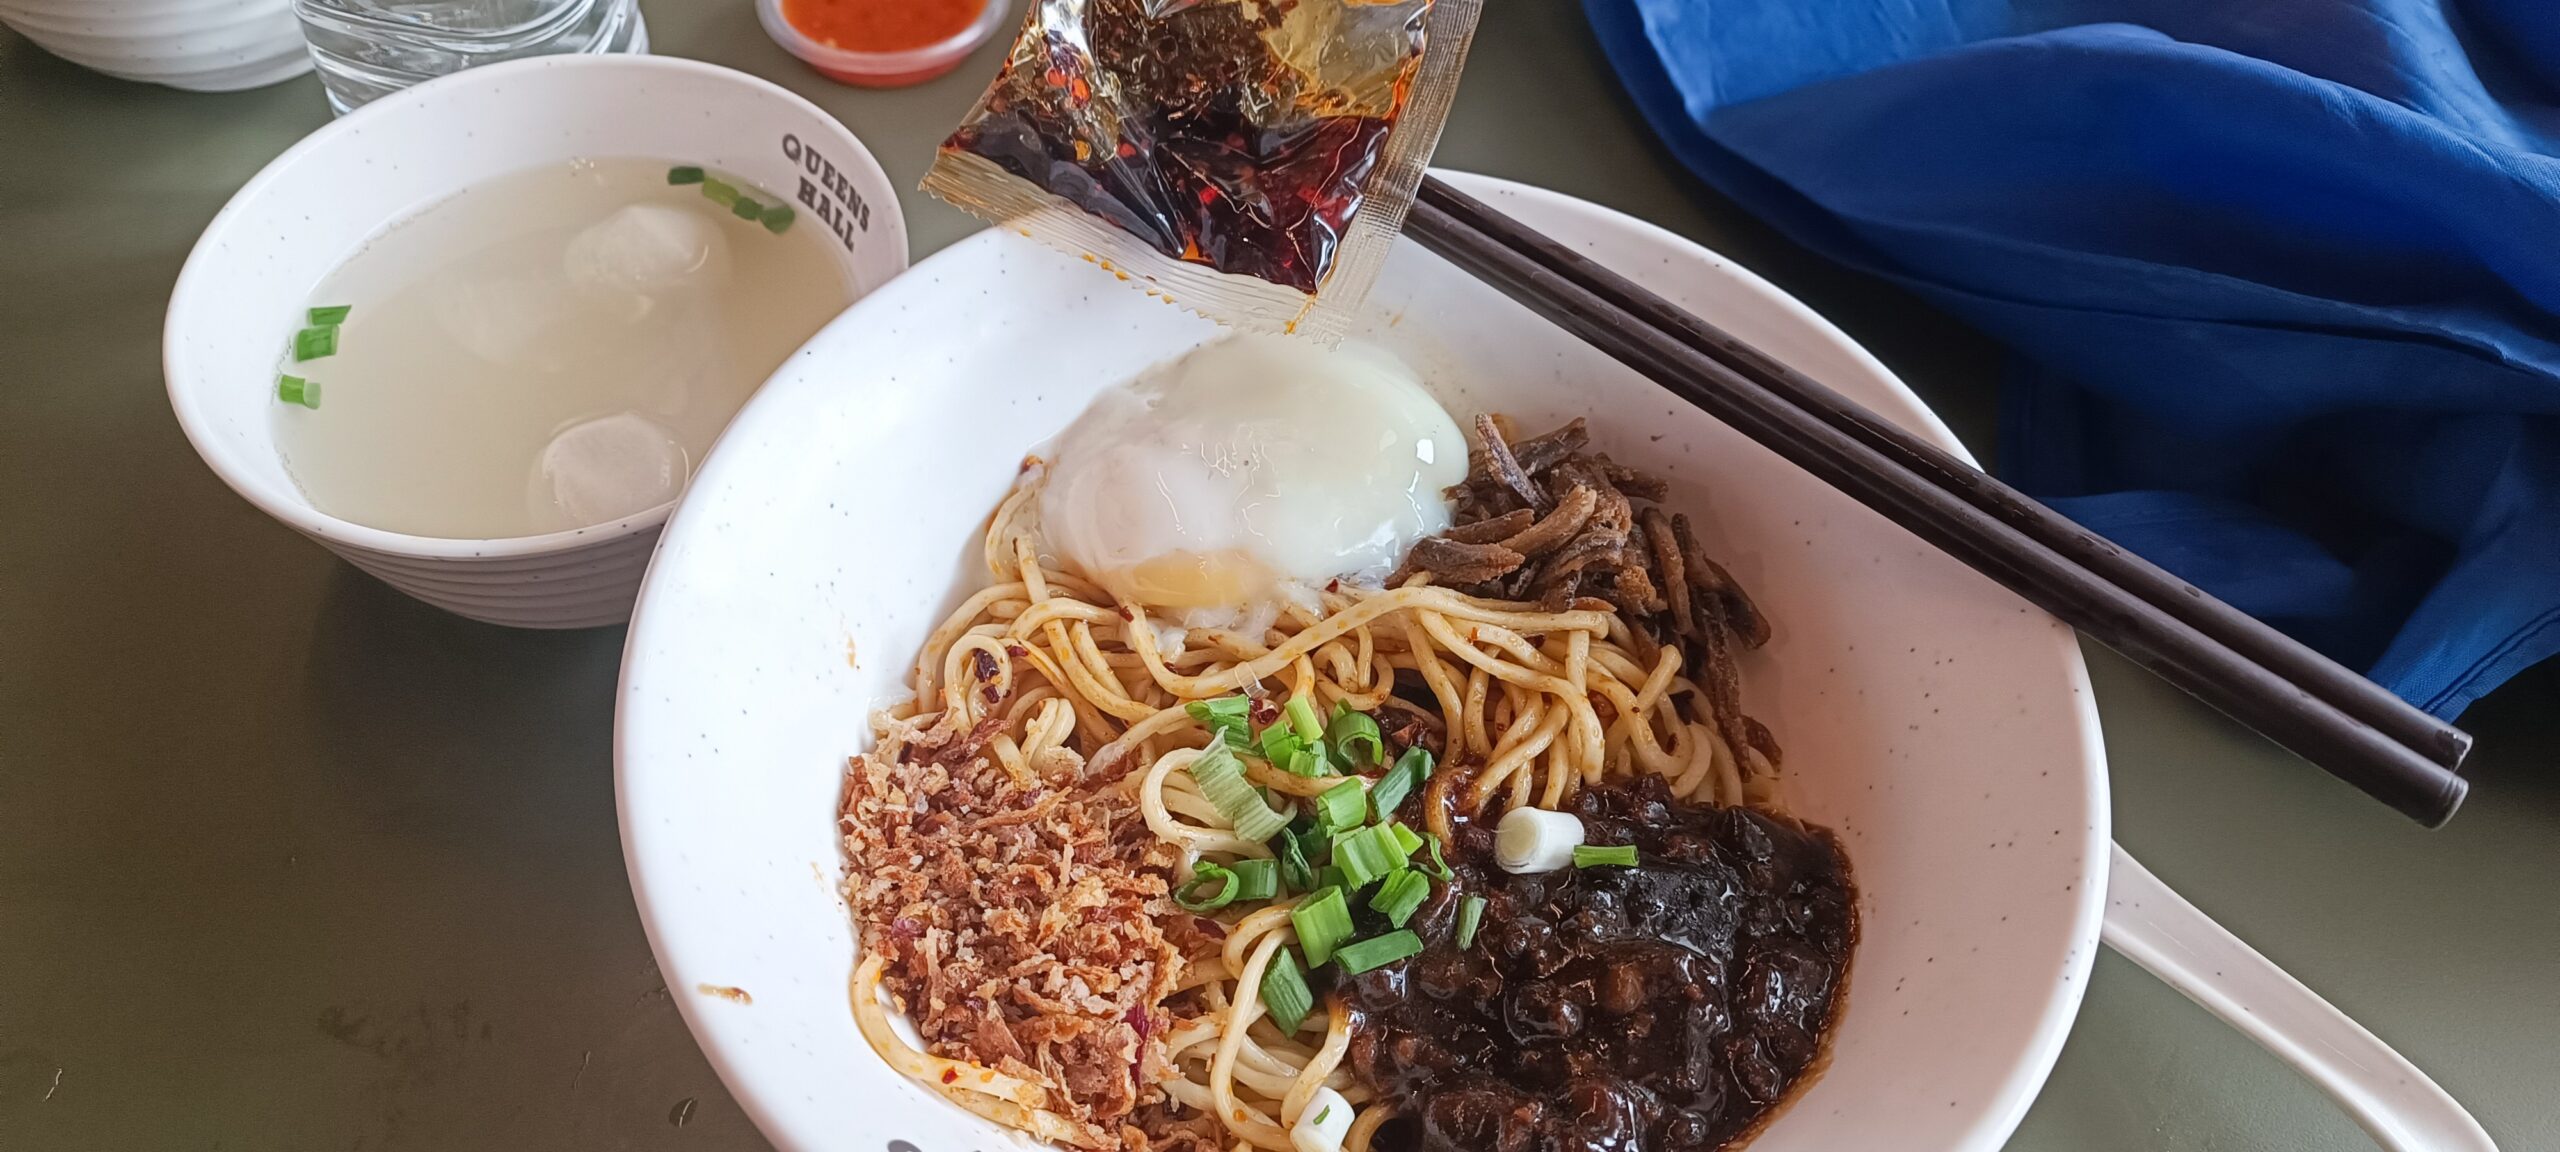 Uncle Kin Chili Pan Mee is Good